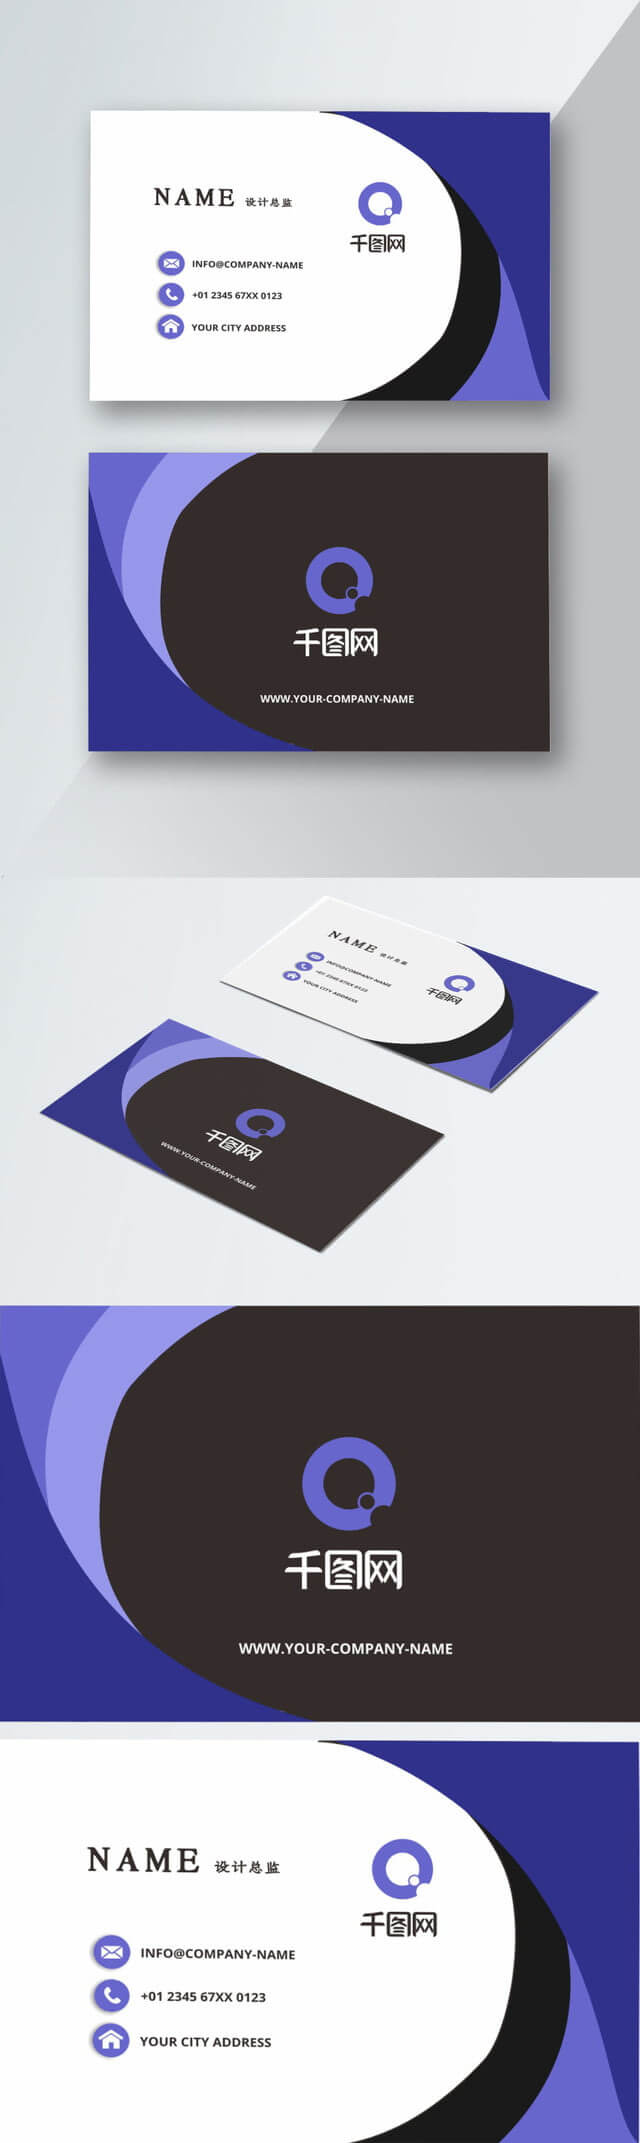 Advertising Business Card Template Business Card Design For Advertising Card Template